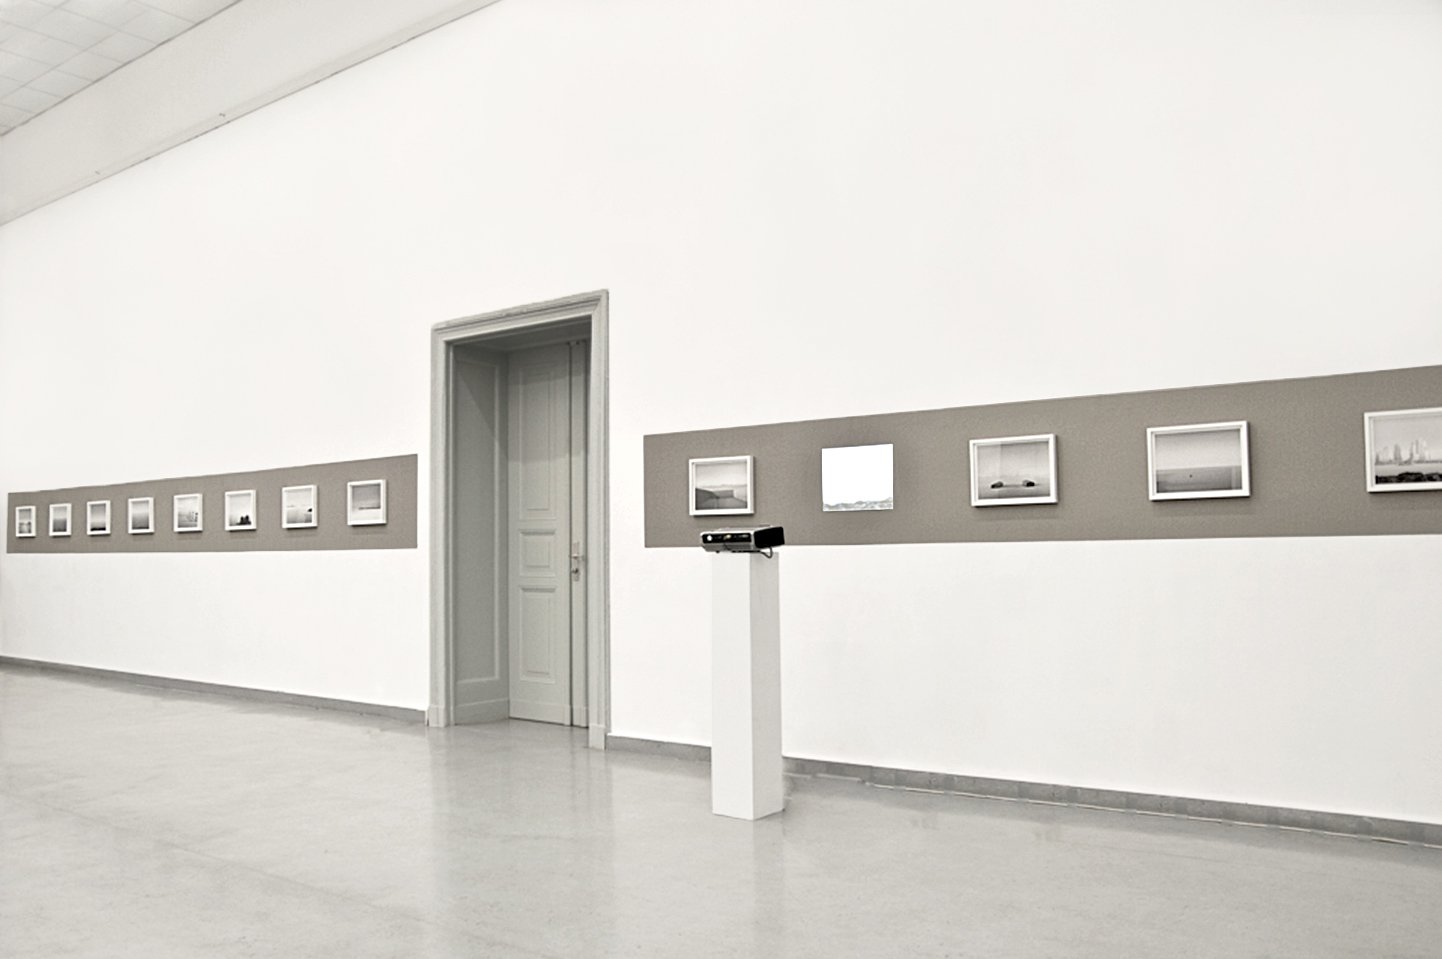  Constructed landscape photo series and video projection. Galerie Alte Schule Berlin  2010 